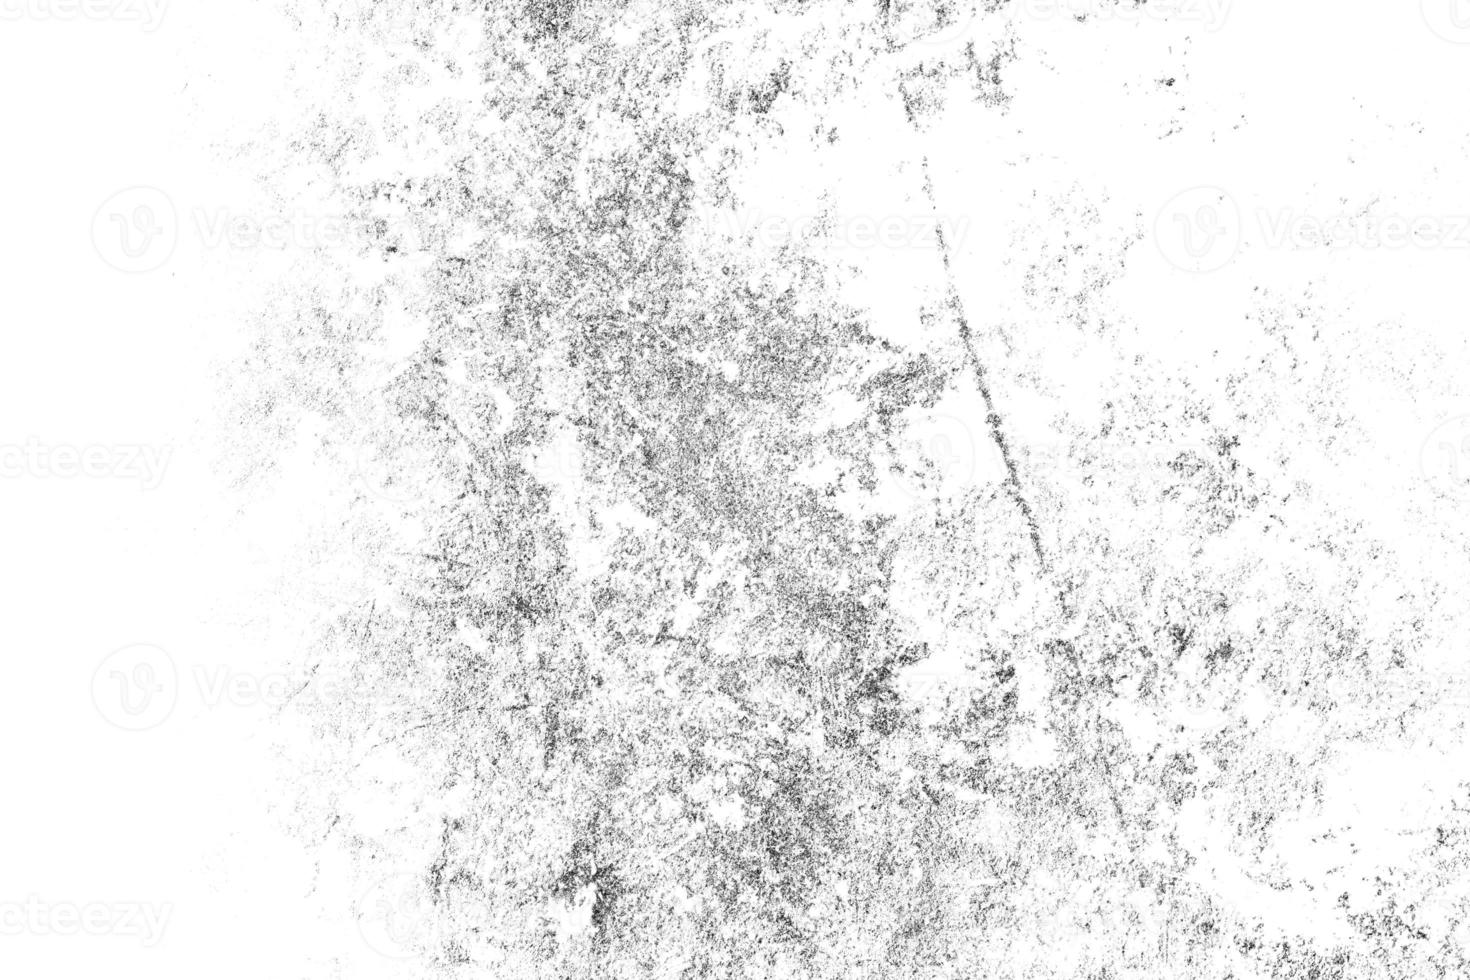 Grunge black and white texture. Distressed Effect. Overlay illustration over any design to create grungy vintage effect. photo